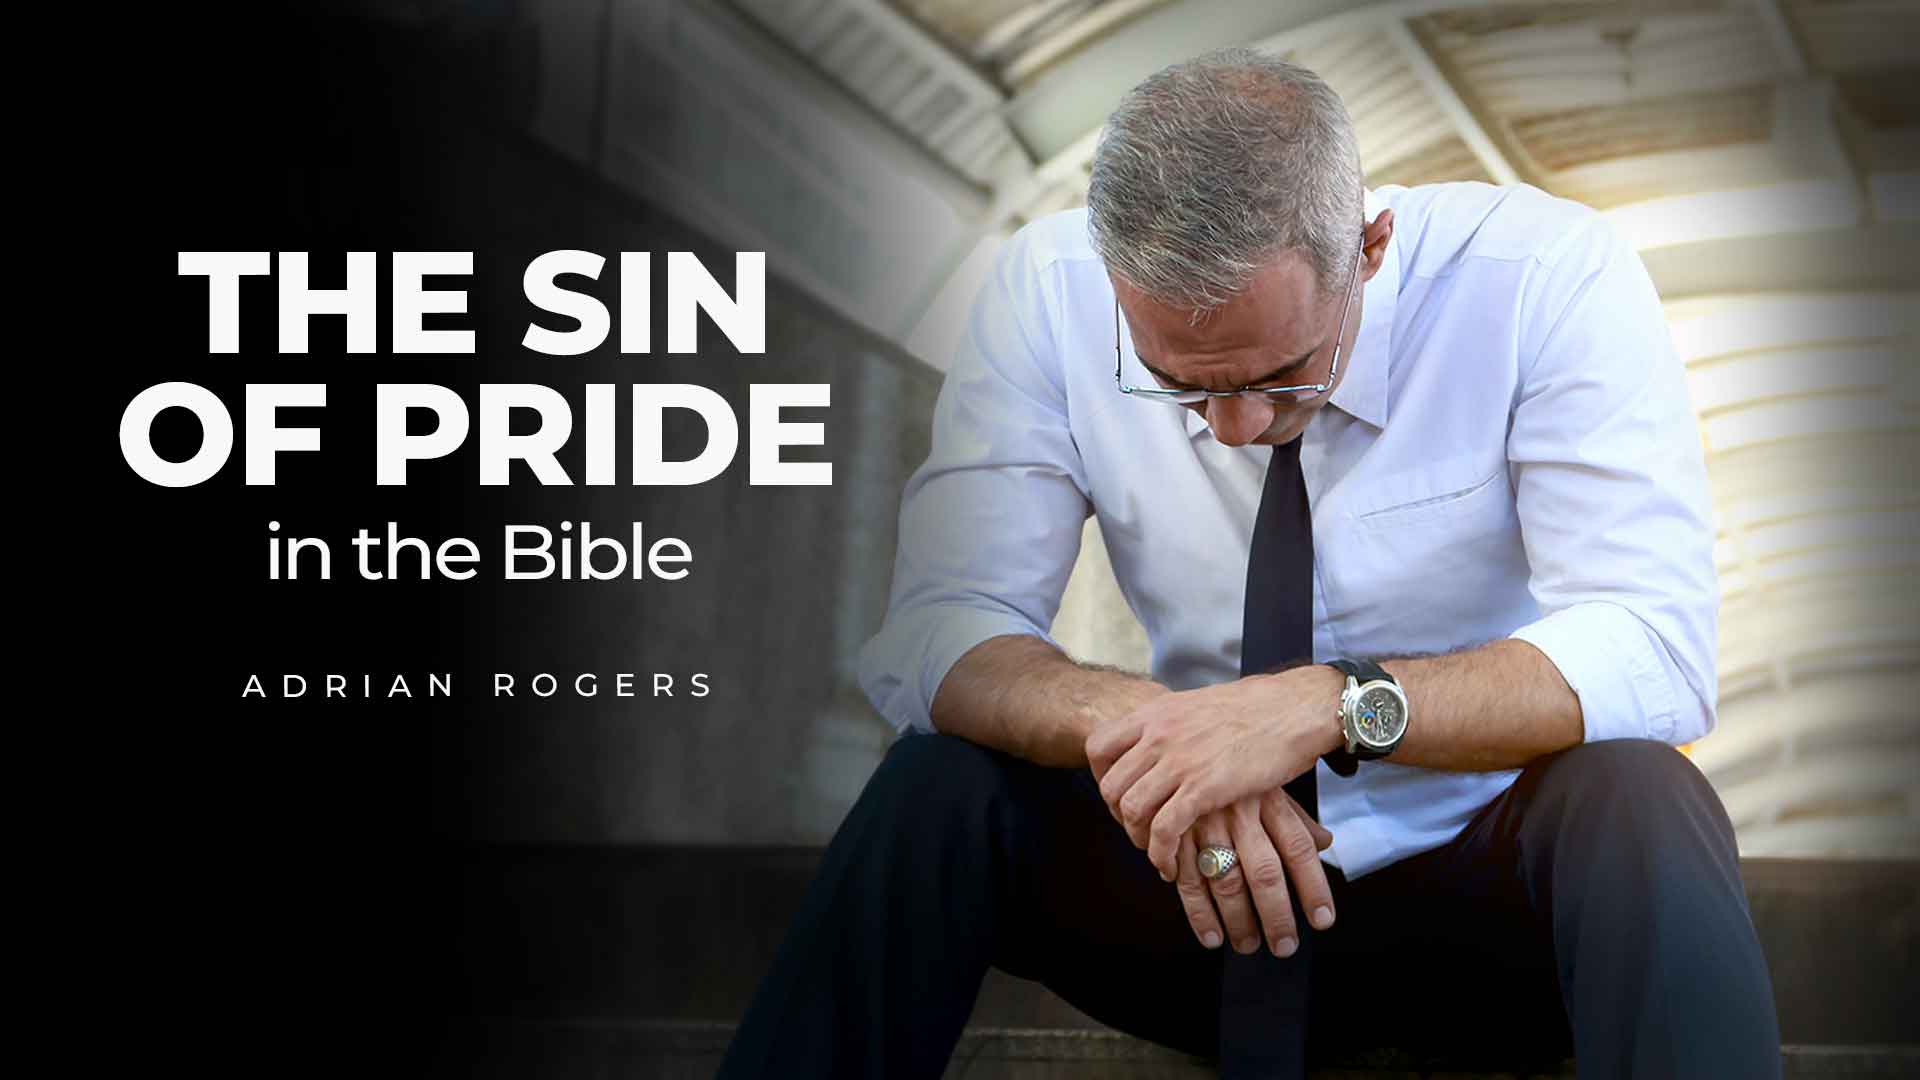 The Sin of Pride in the Bible 1920x1080 Article Image